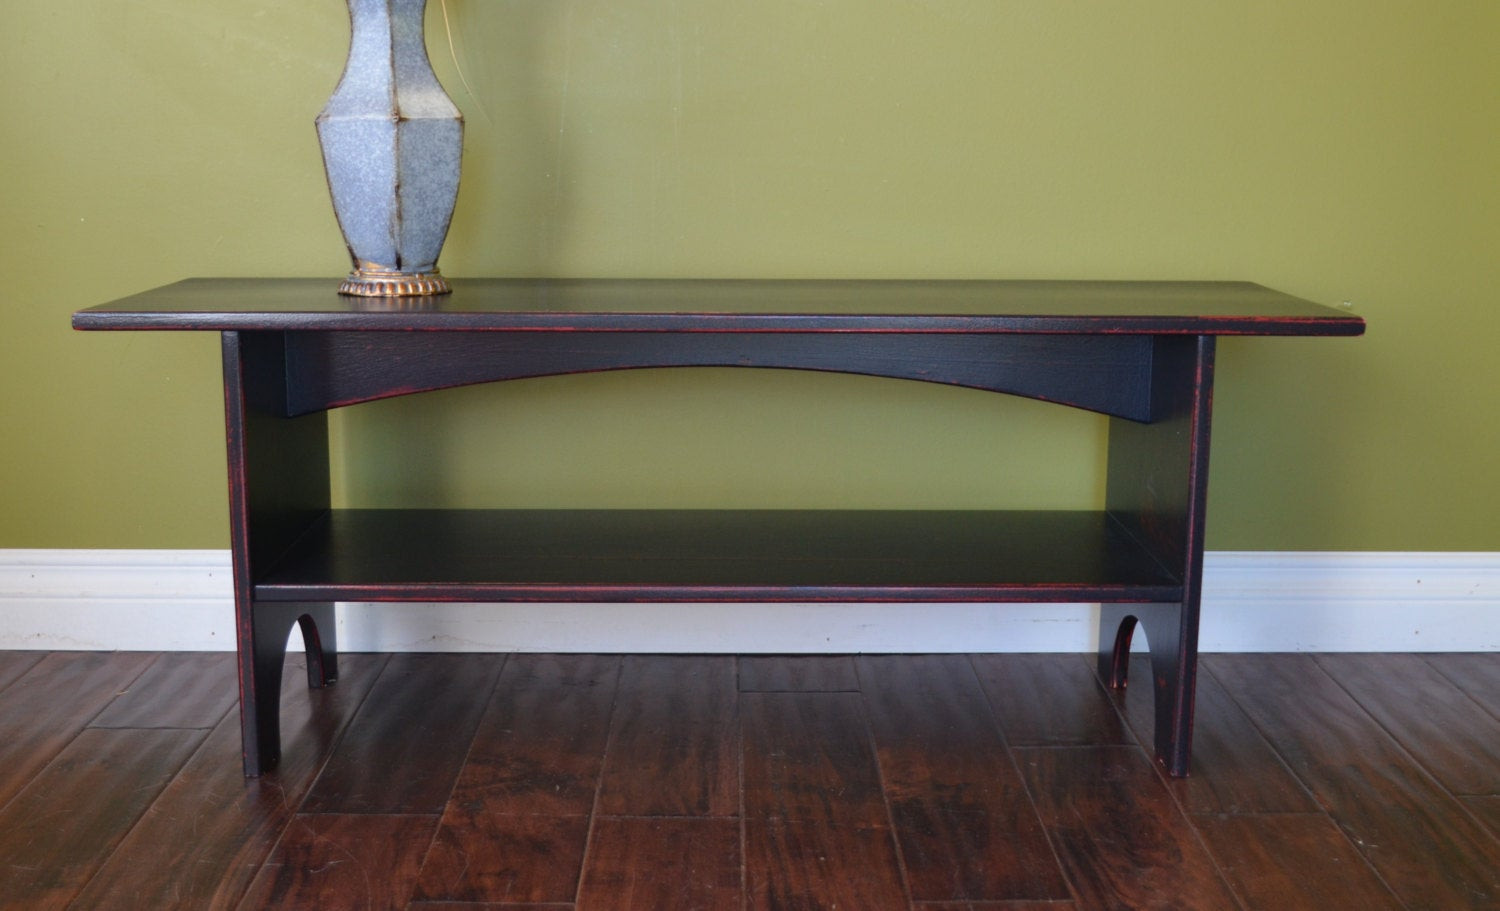 Sitting Bench With Storage
 Antiqued Sitting Bench Storage Bench Entryway Bench in Black